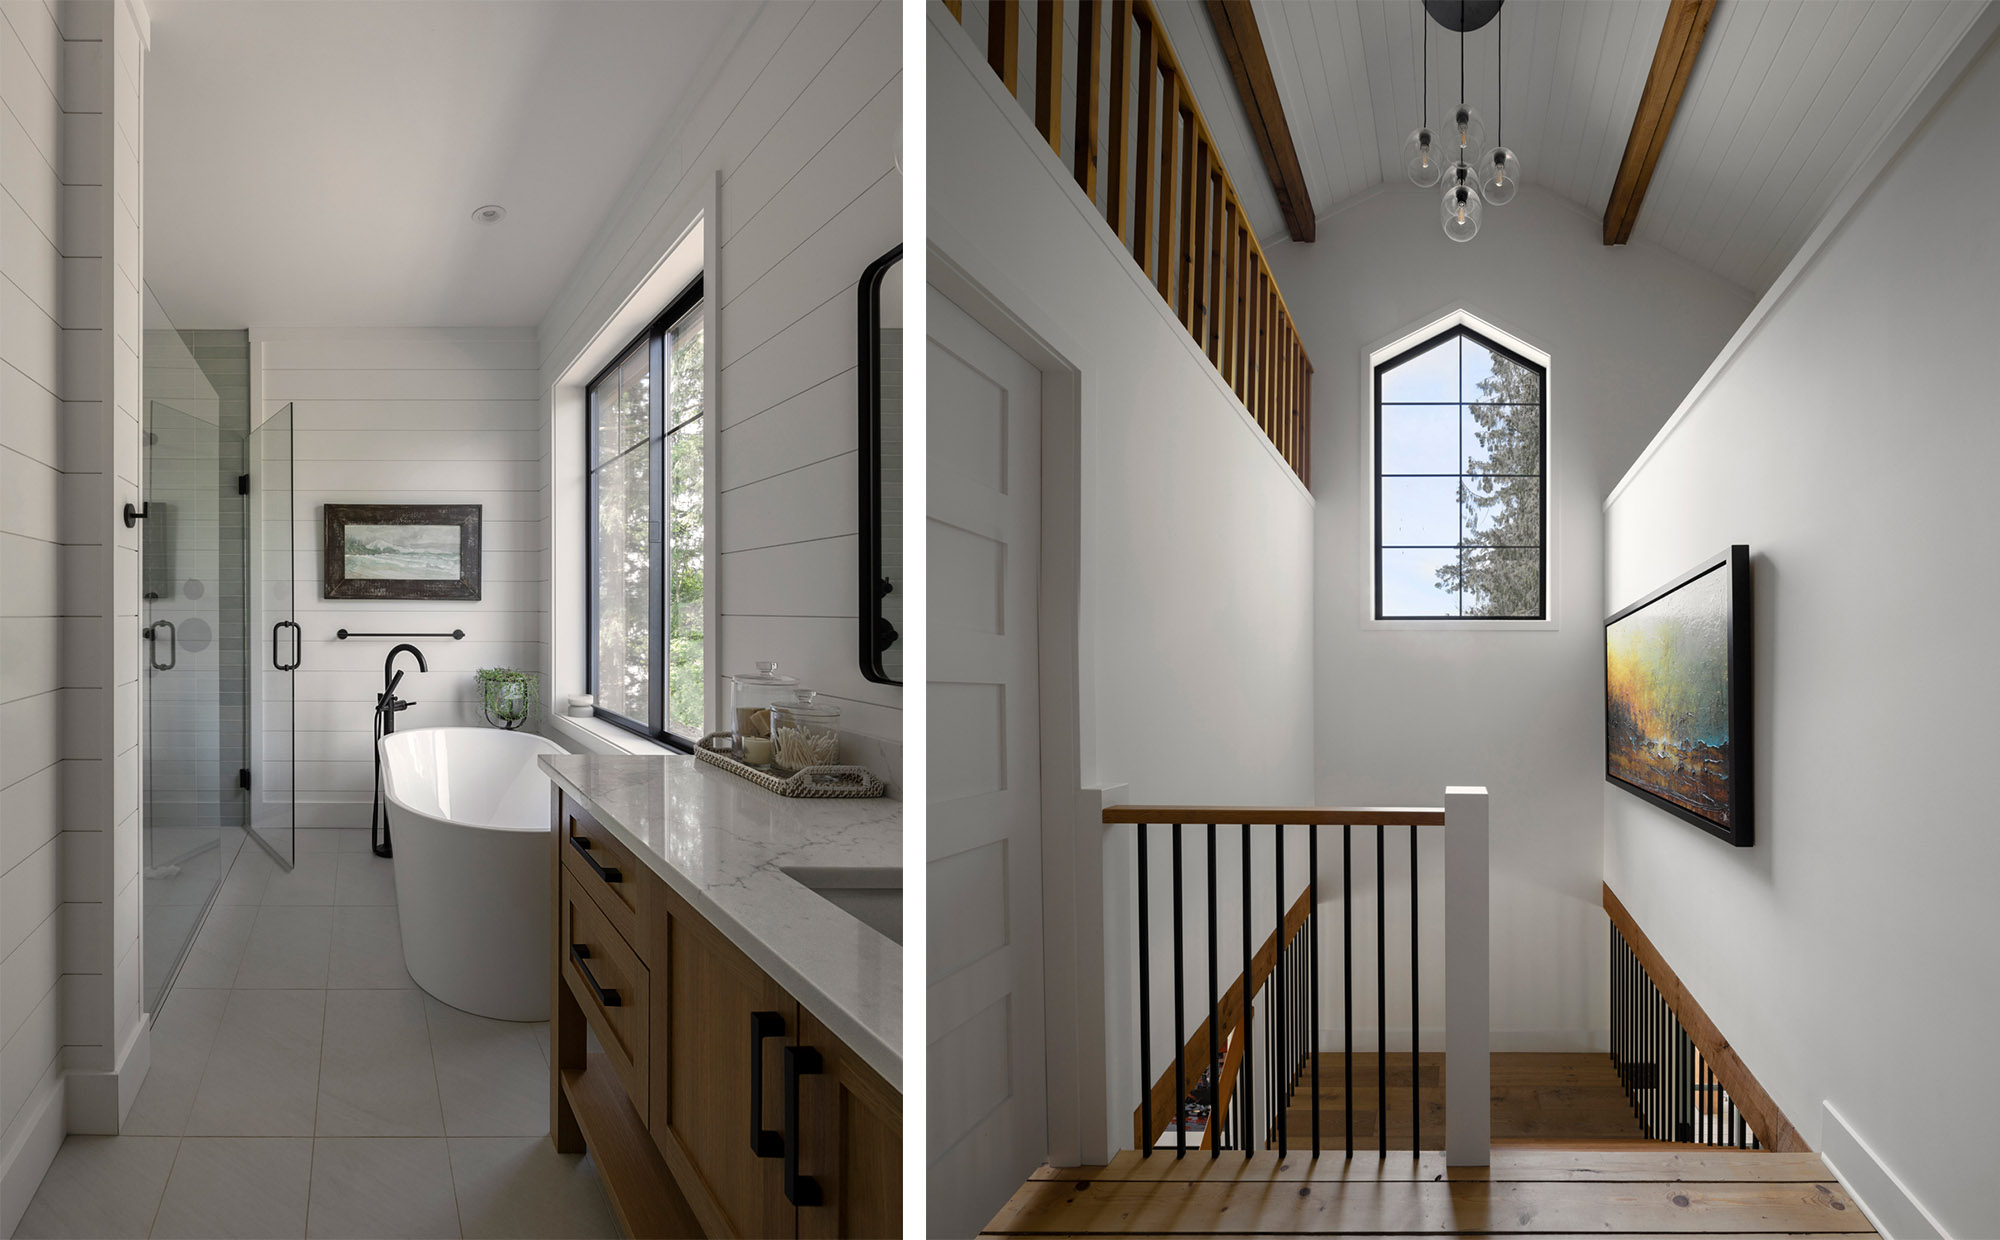 Bright bathroom and interior spaces in this modern farmhouse.